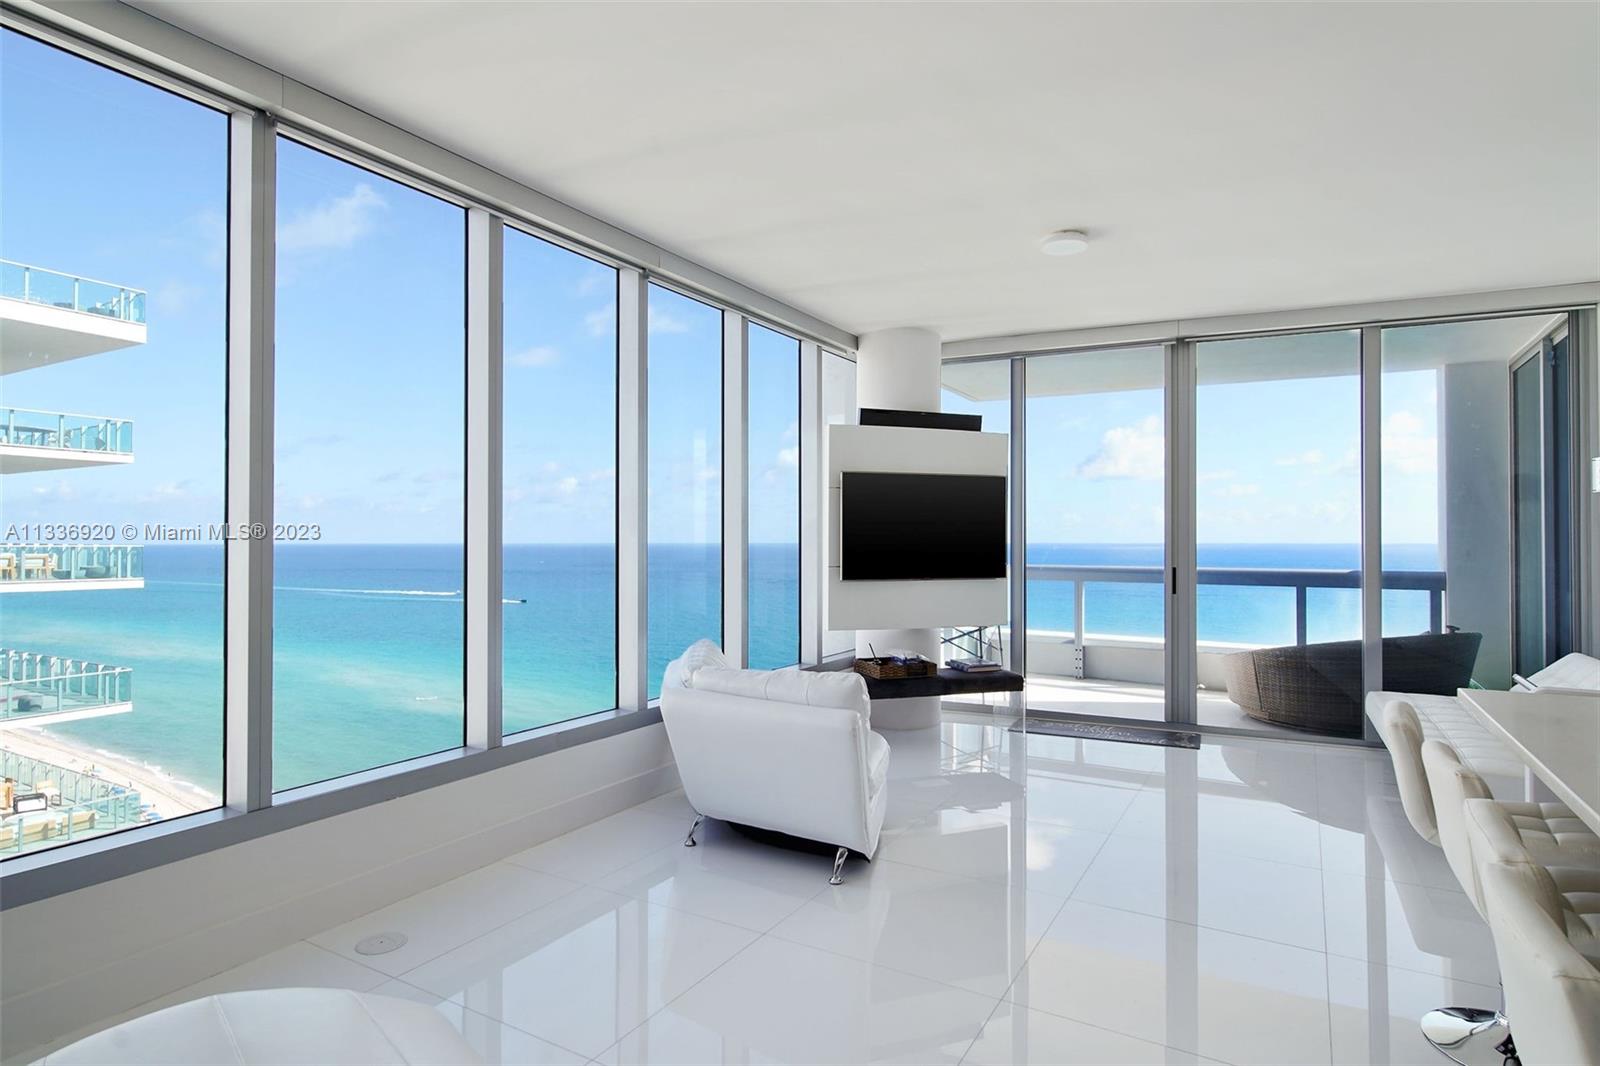 Listing Image 6899 Collins Ave #1905